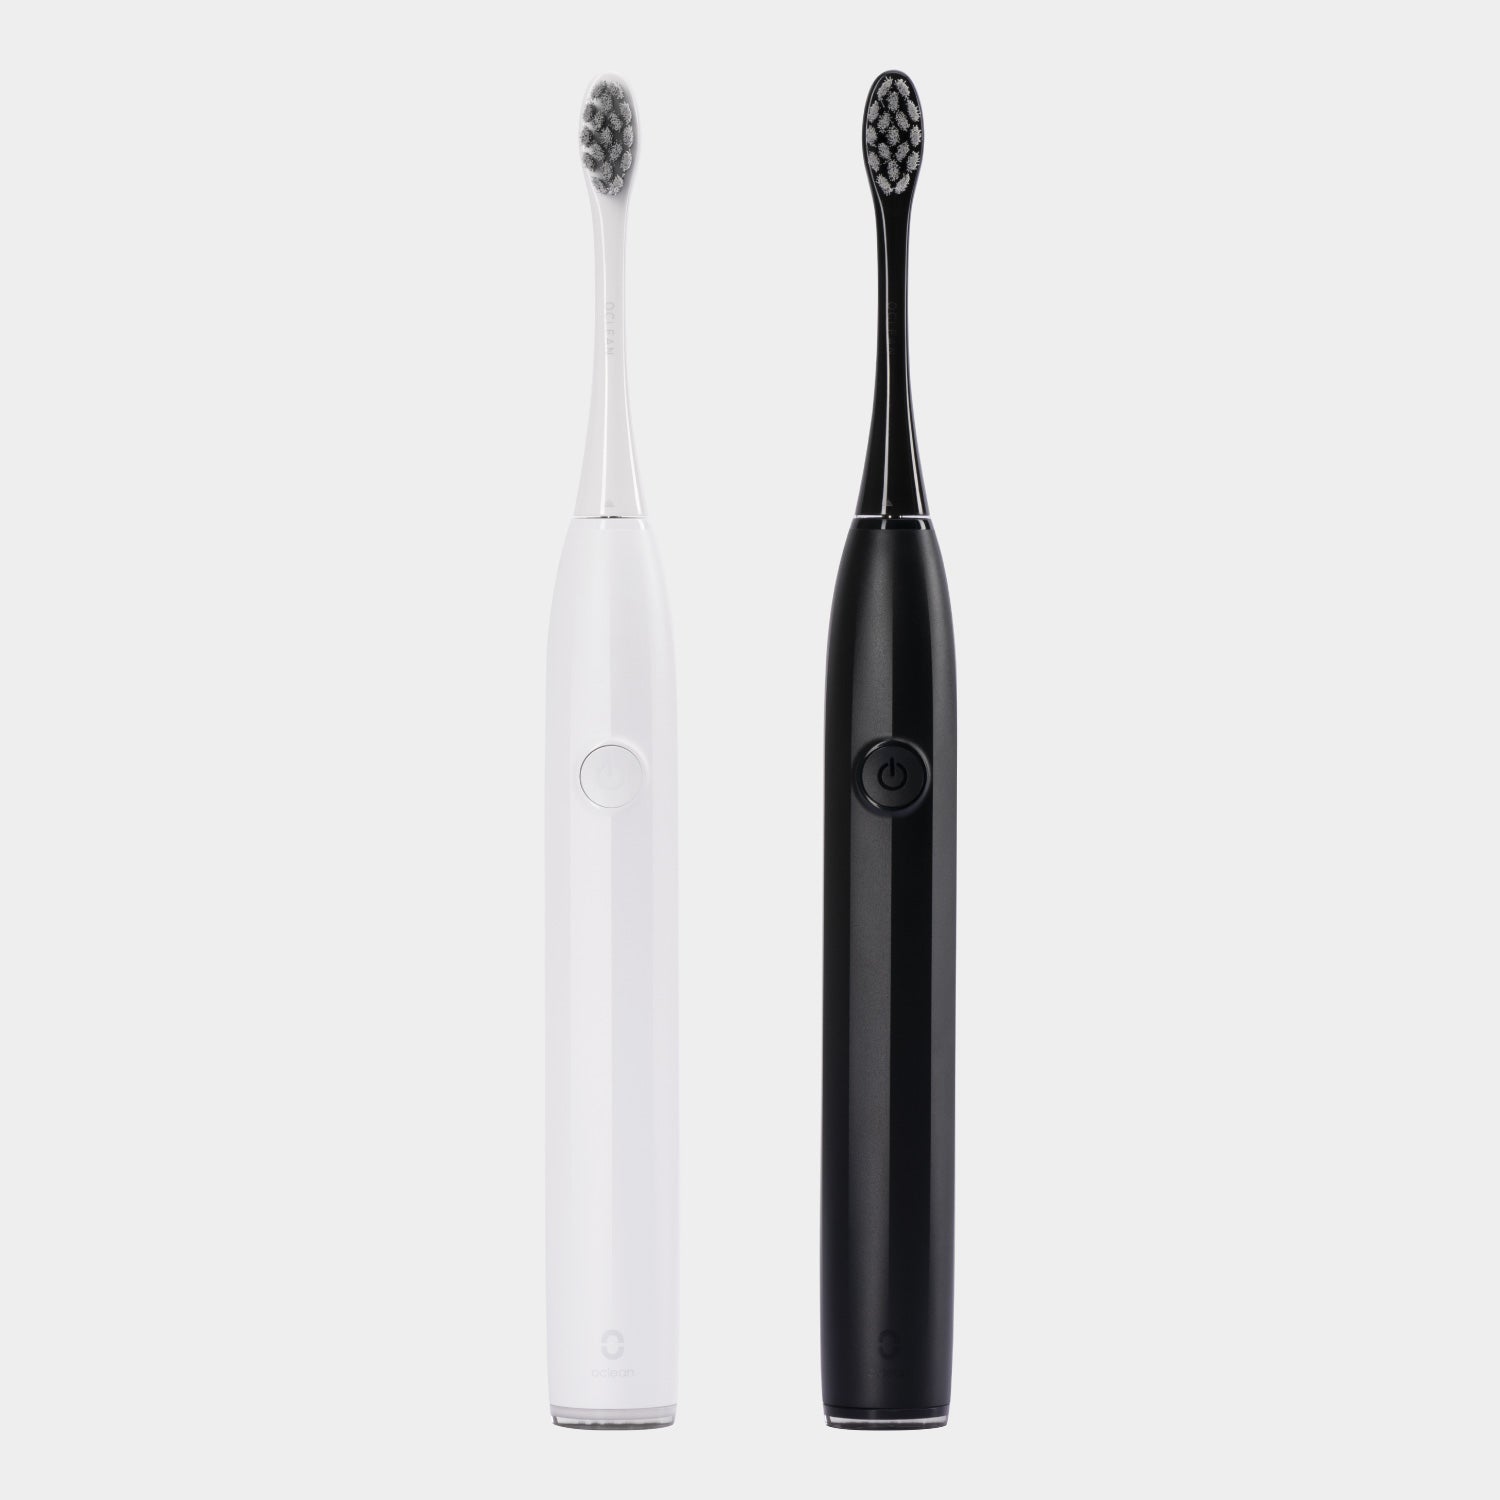 Oclean Endurance Electric Toothbrush-Toothbrushes-Oclean US Store